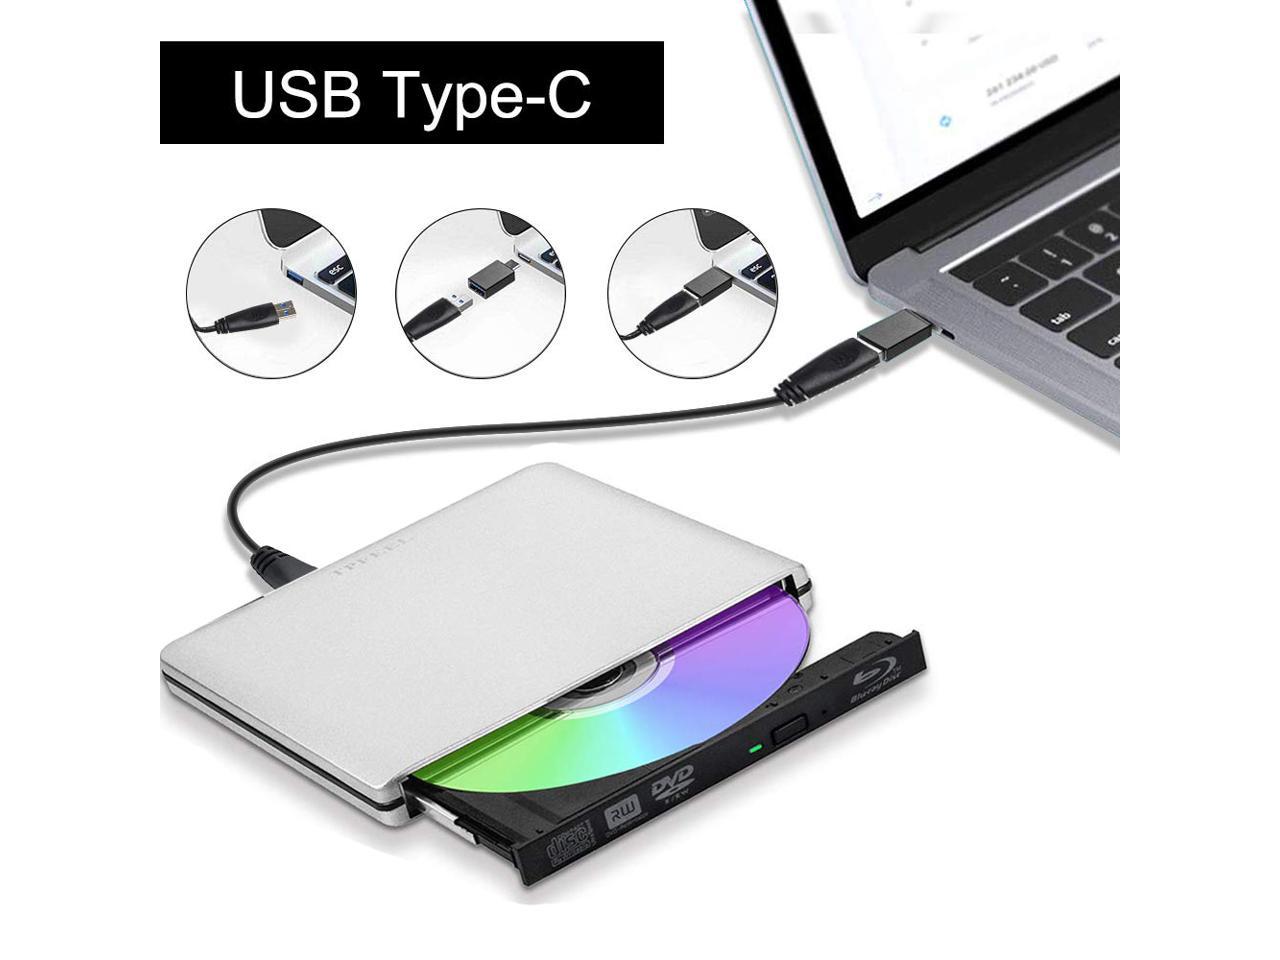 External Blu Ray DVD Drive 3D,LUOM USB 3.0 and Type-C Bluray DVD CD RW Row  Burner Player Rewriter Compatible for MacBook OS Windows 7 8 10 PC iMac -  